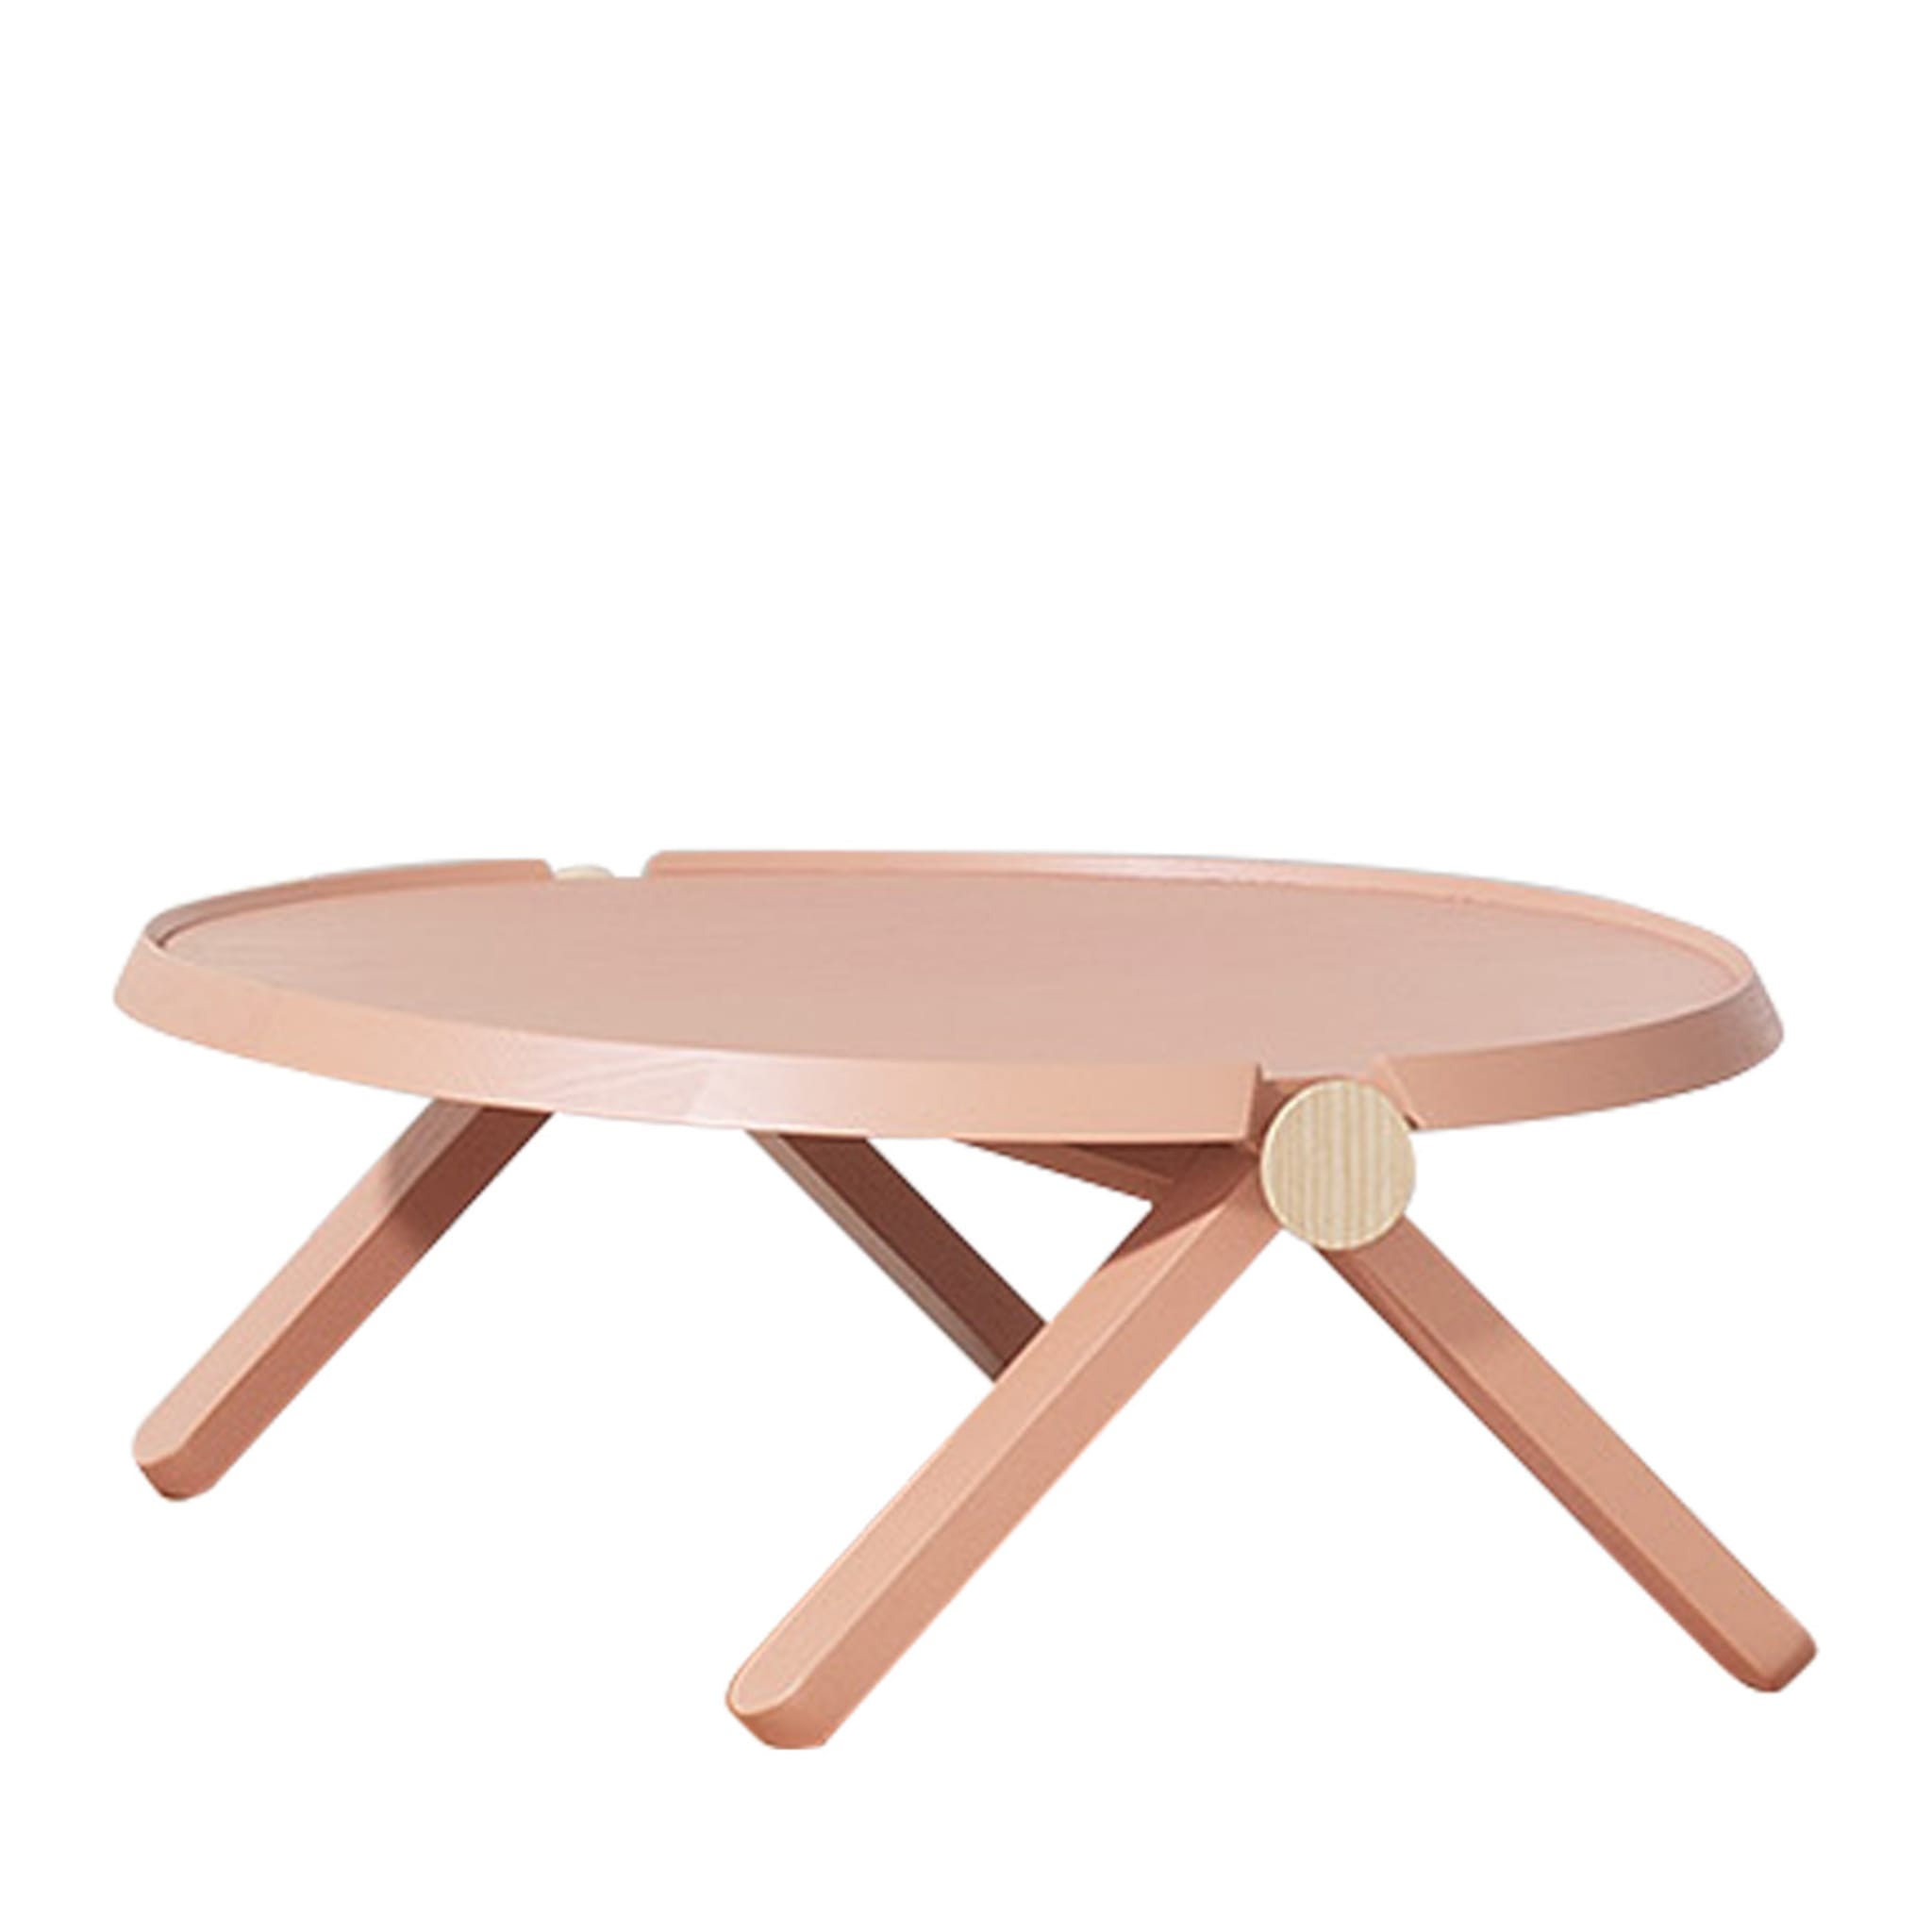 Lilliput 310 Salmon Coffee Table by Studioventotto - Main view